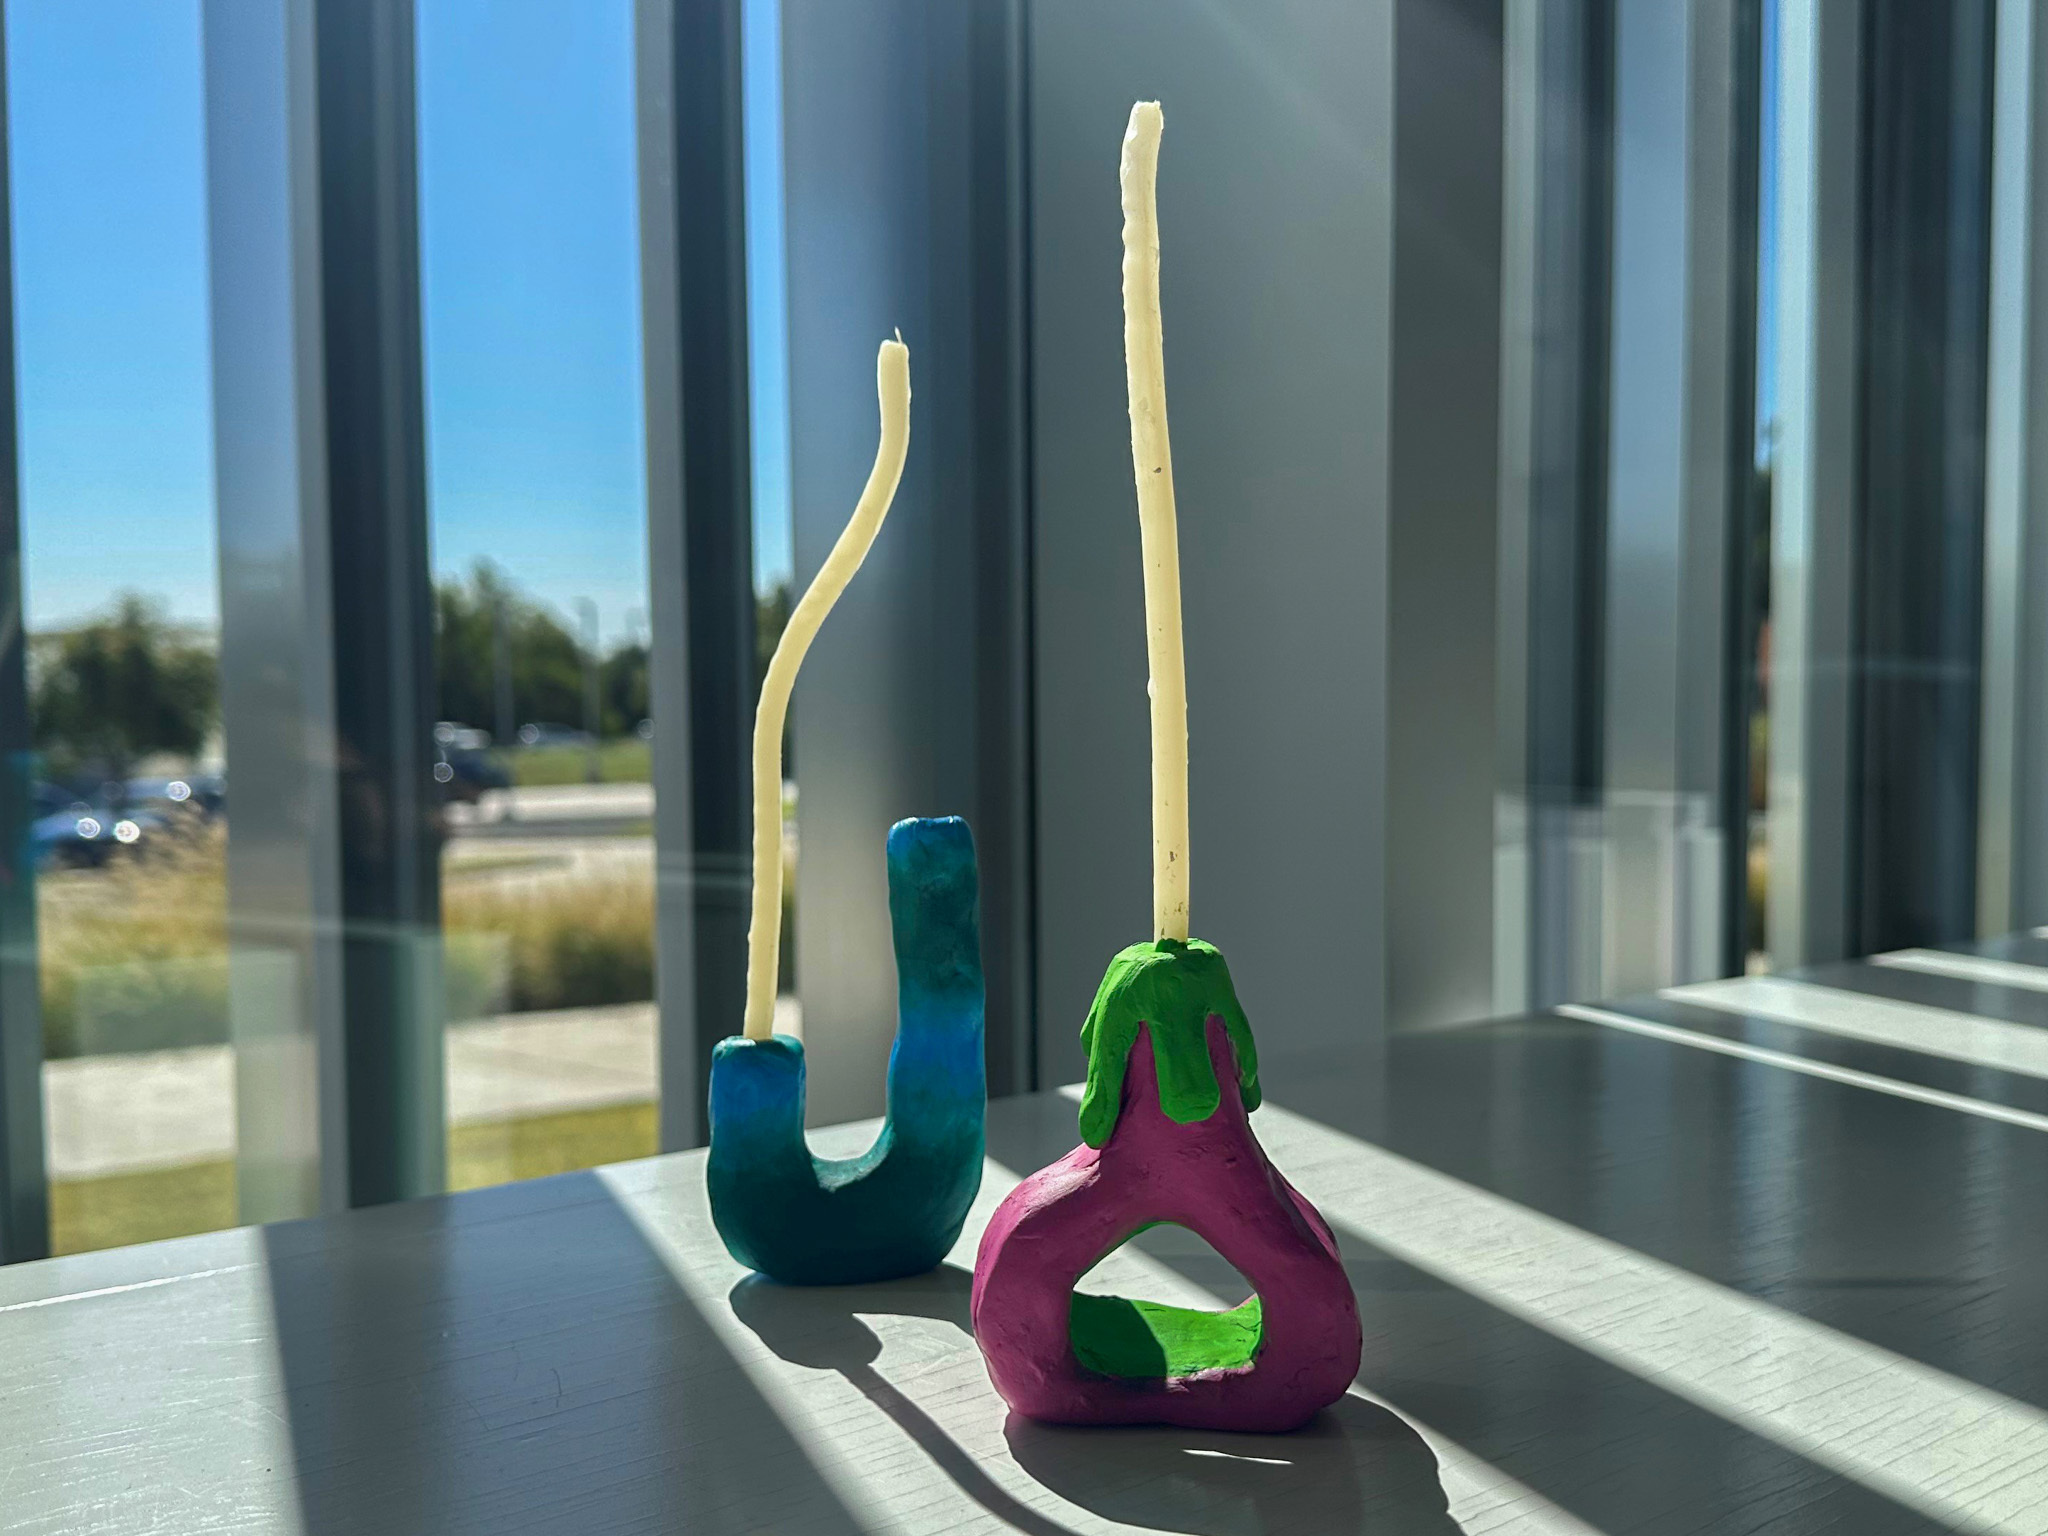 Two colorful and whimsical candleholders with white tapers